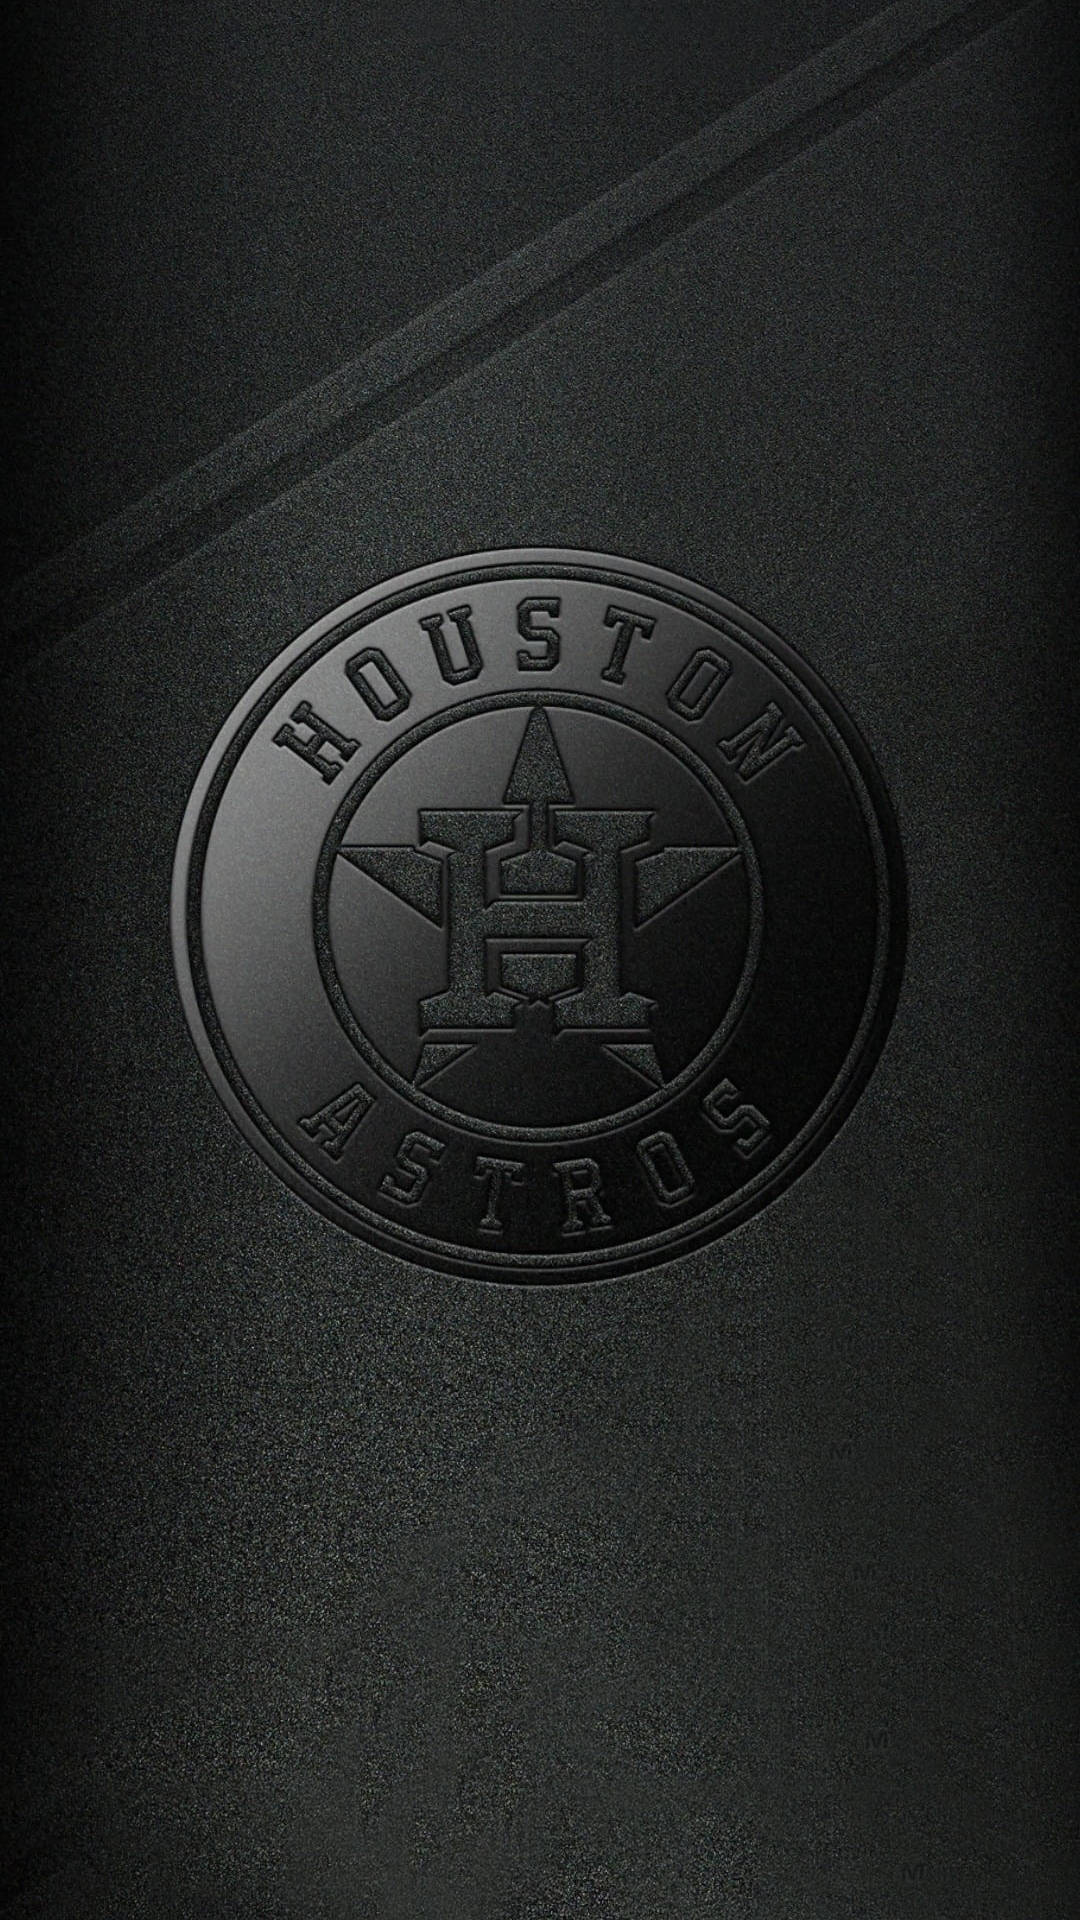 Houston astros Baseball Astros iPhone Wallpapers Free Download